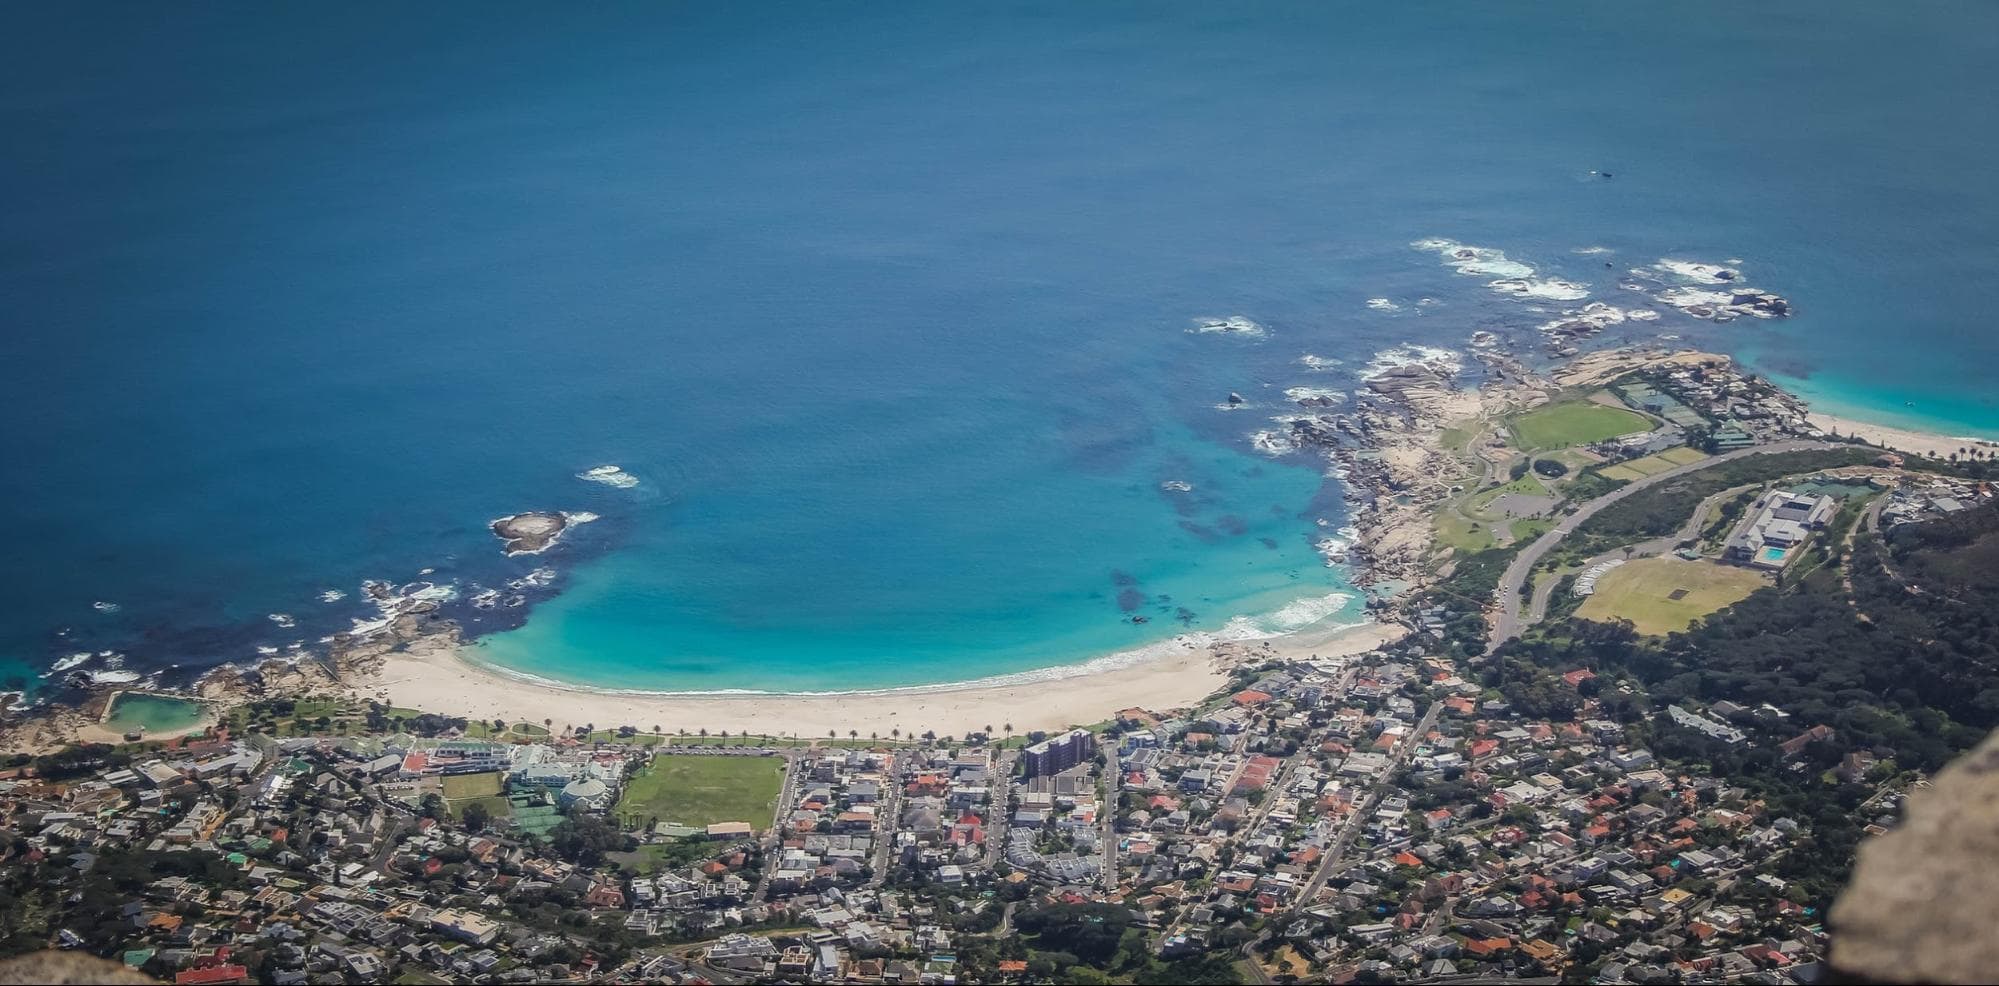 Camps Bay beach from above, with Clifton 4 in the right corner